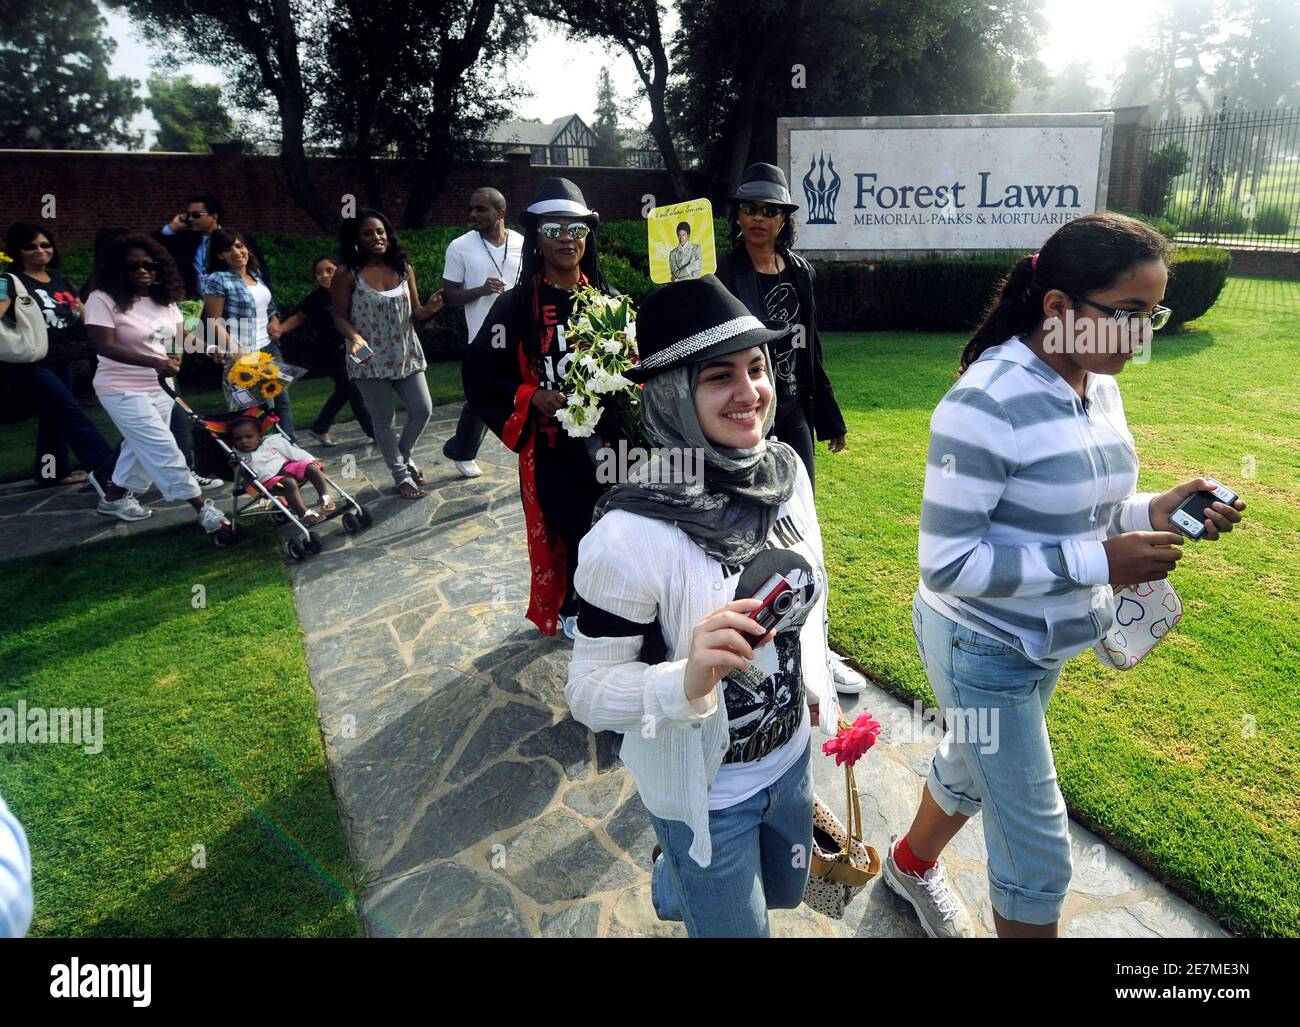 The first group of fans walk after being allowed in to pay tribute to the late pop star Michael Jackson a year after his death at his grave site at Forest Lawn Memorial Parks and Mortuaries in Glendale, California June 25, 2010. Jackson's sudden death at age 50 on June 25 last year in Los Angeles sparked an outpouring of grief internationally for the former child star, who was rehearsing for a series of concerts aimed at reviving a career shattered by bizarre events as an adult and acquittal on charges of molesting a 13-year-old boy.     To match Reuters Life! PEOPLE-JACKSON/    REUTERS/Gus Ru Stock Photo